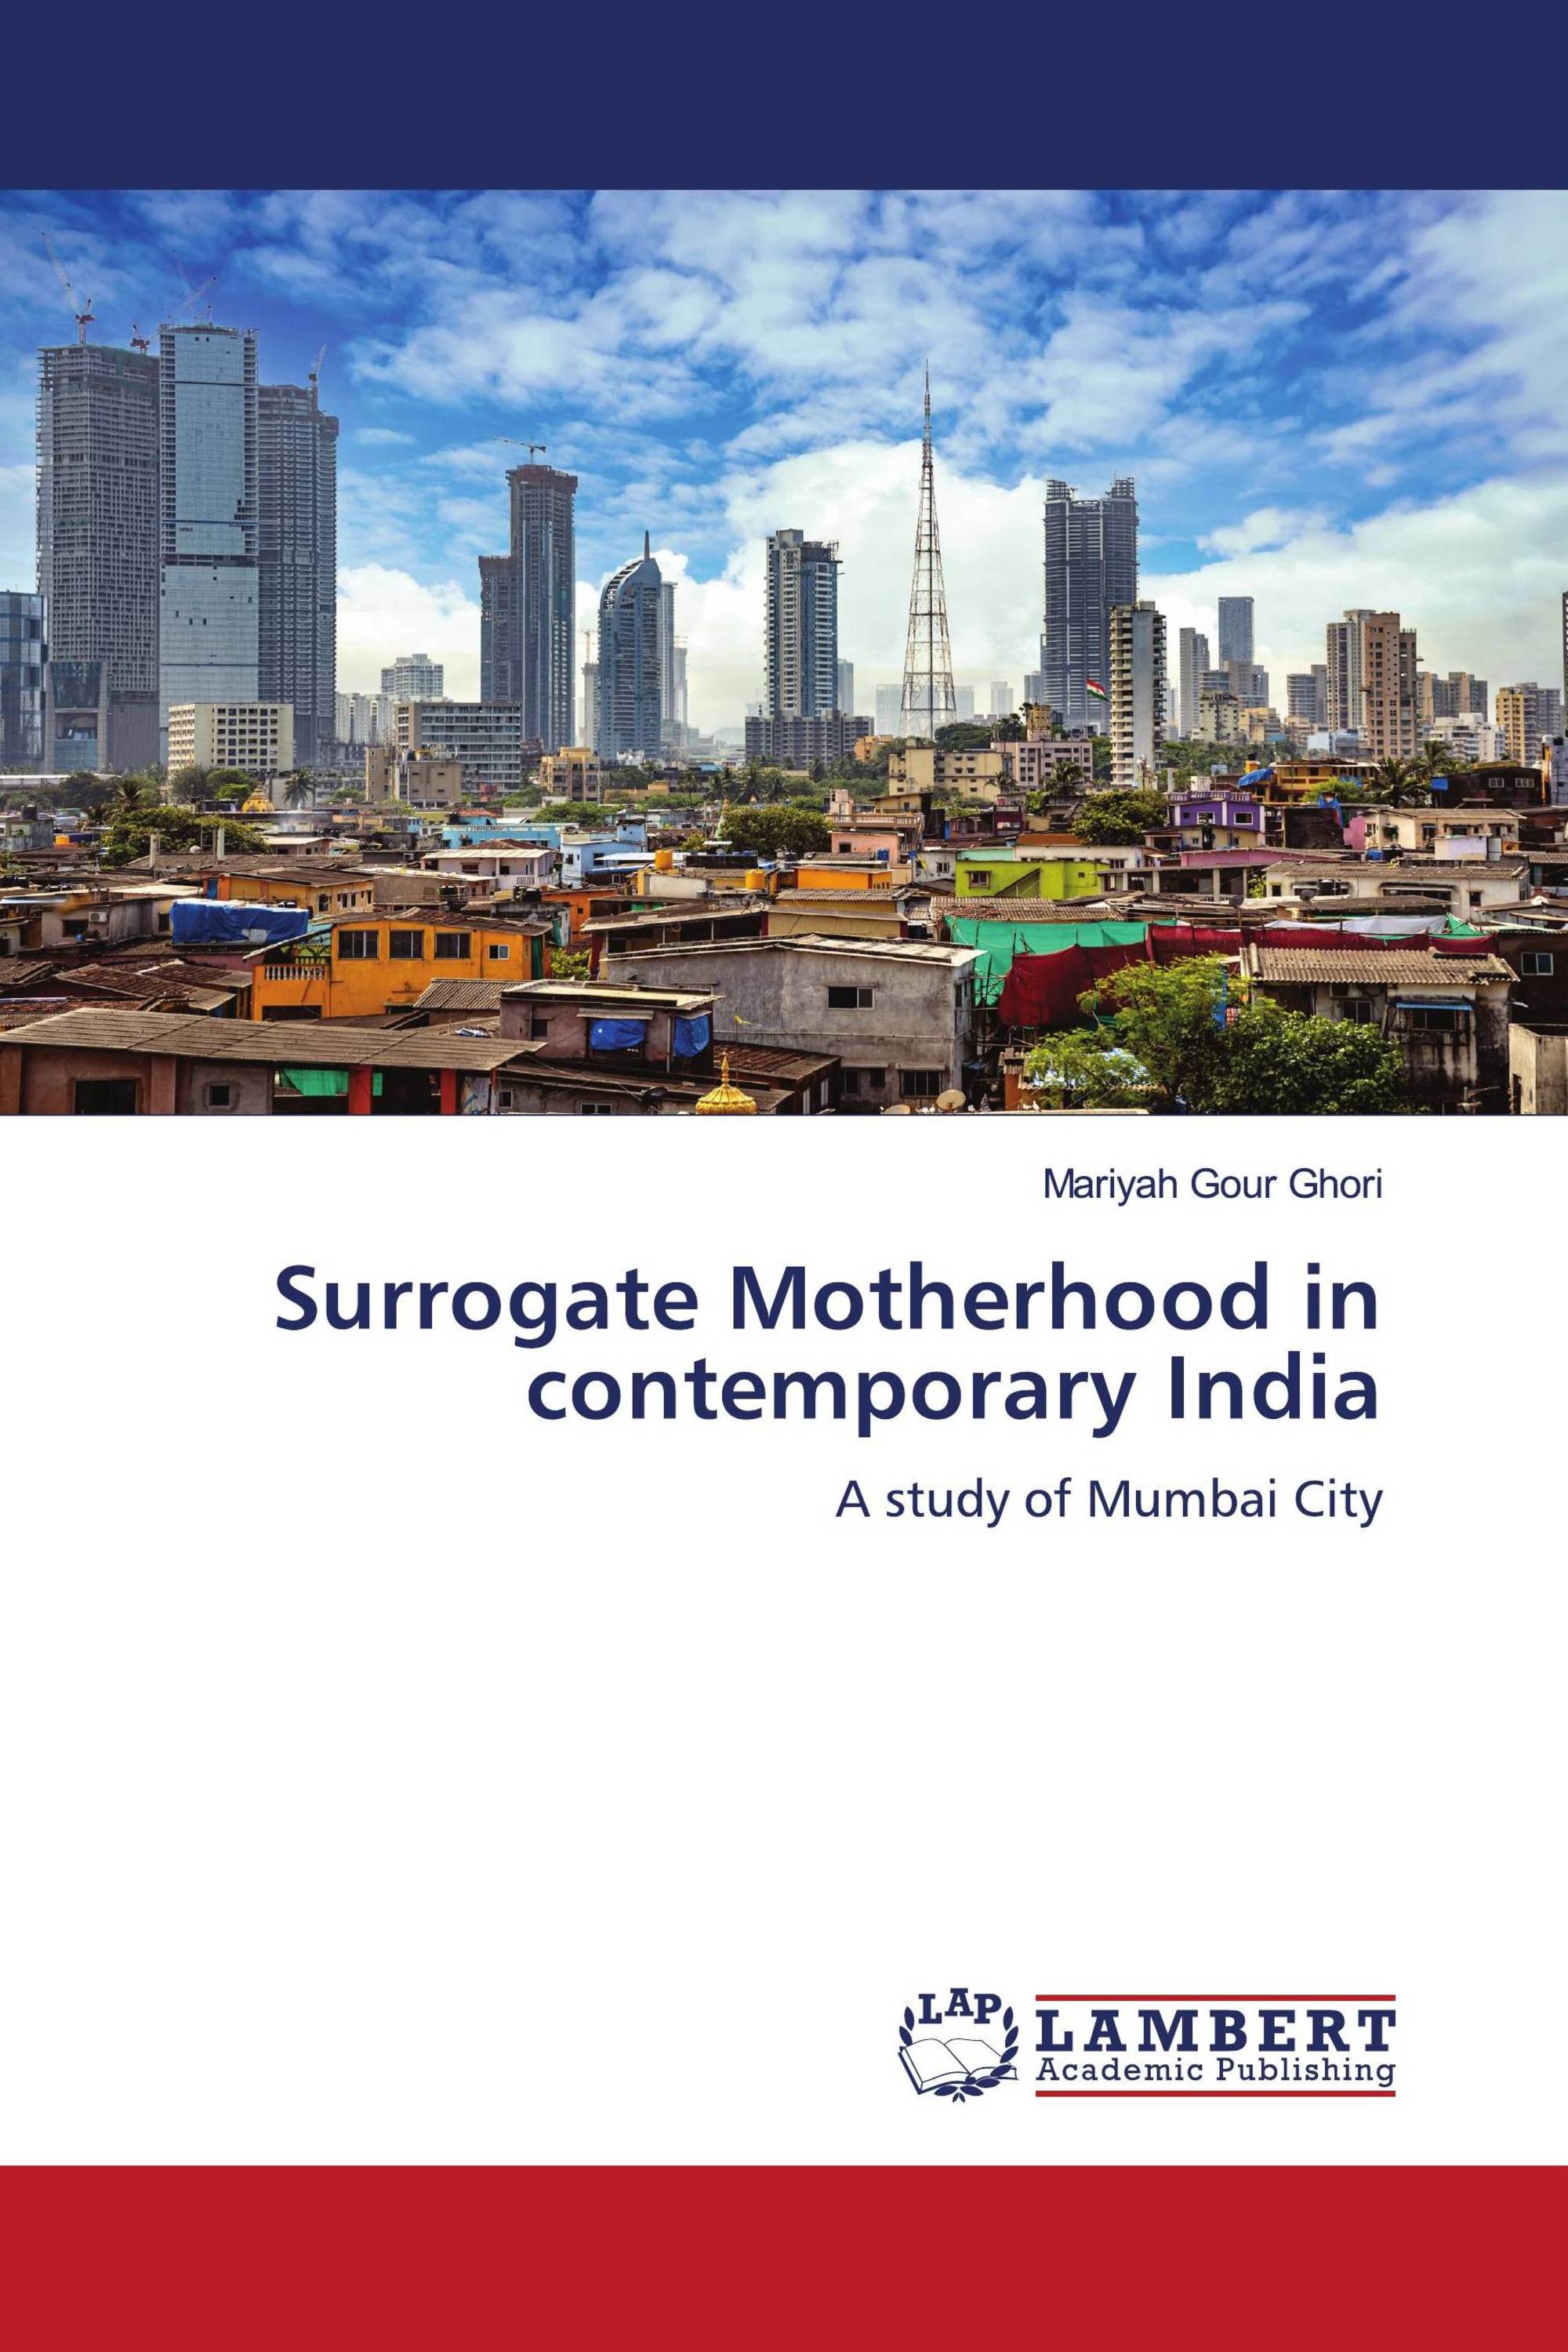 Surrogate Motherhood in contemporary India